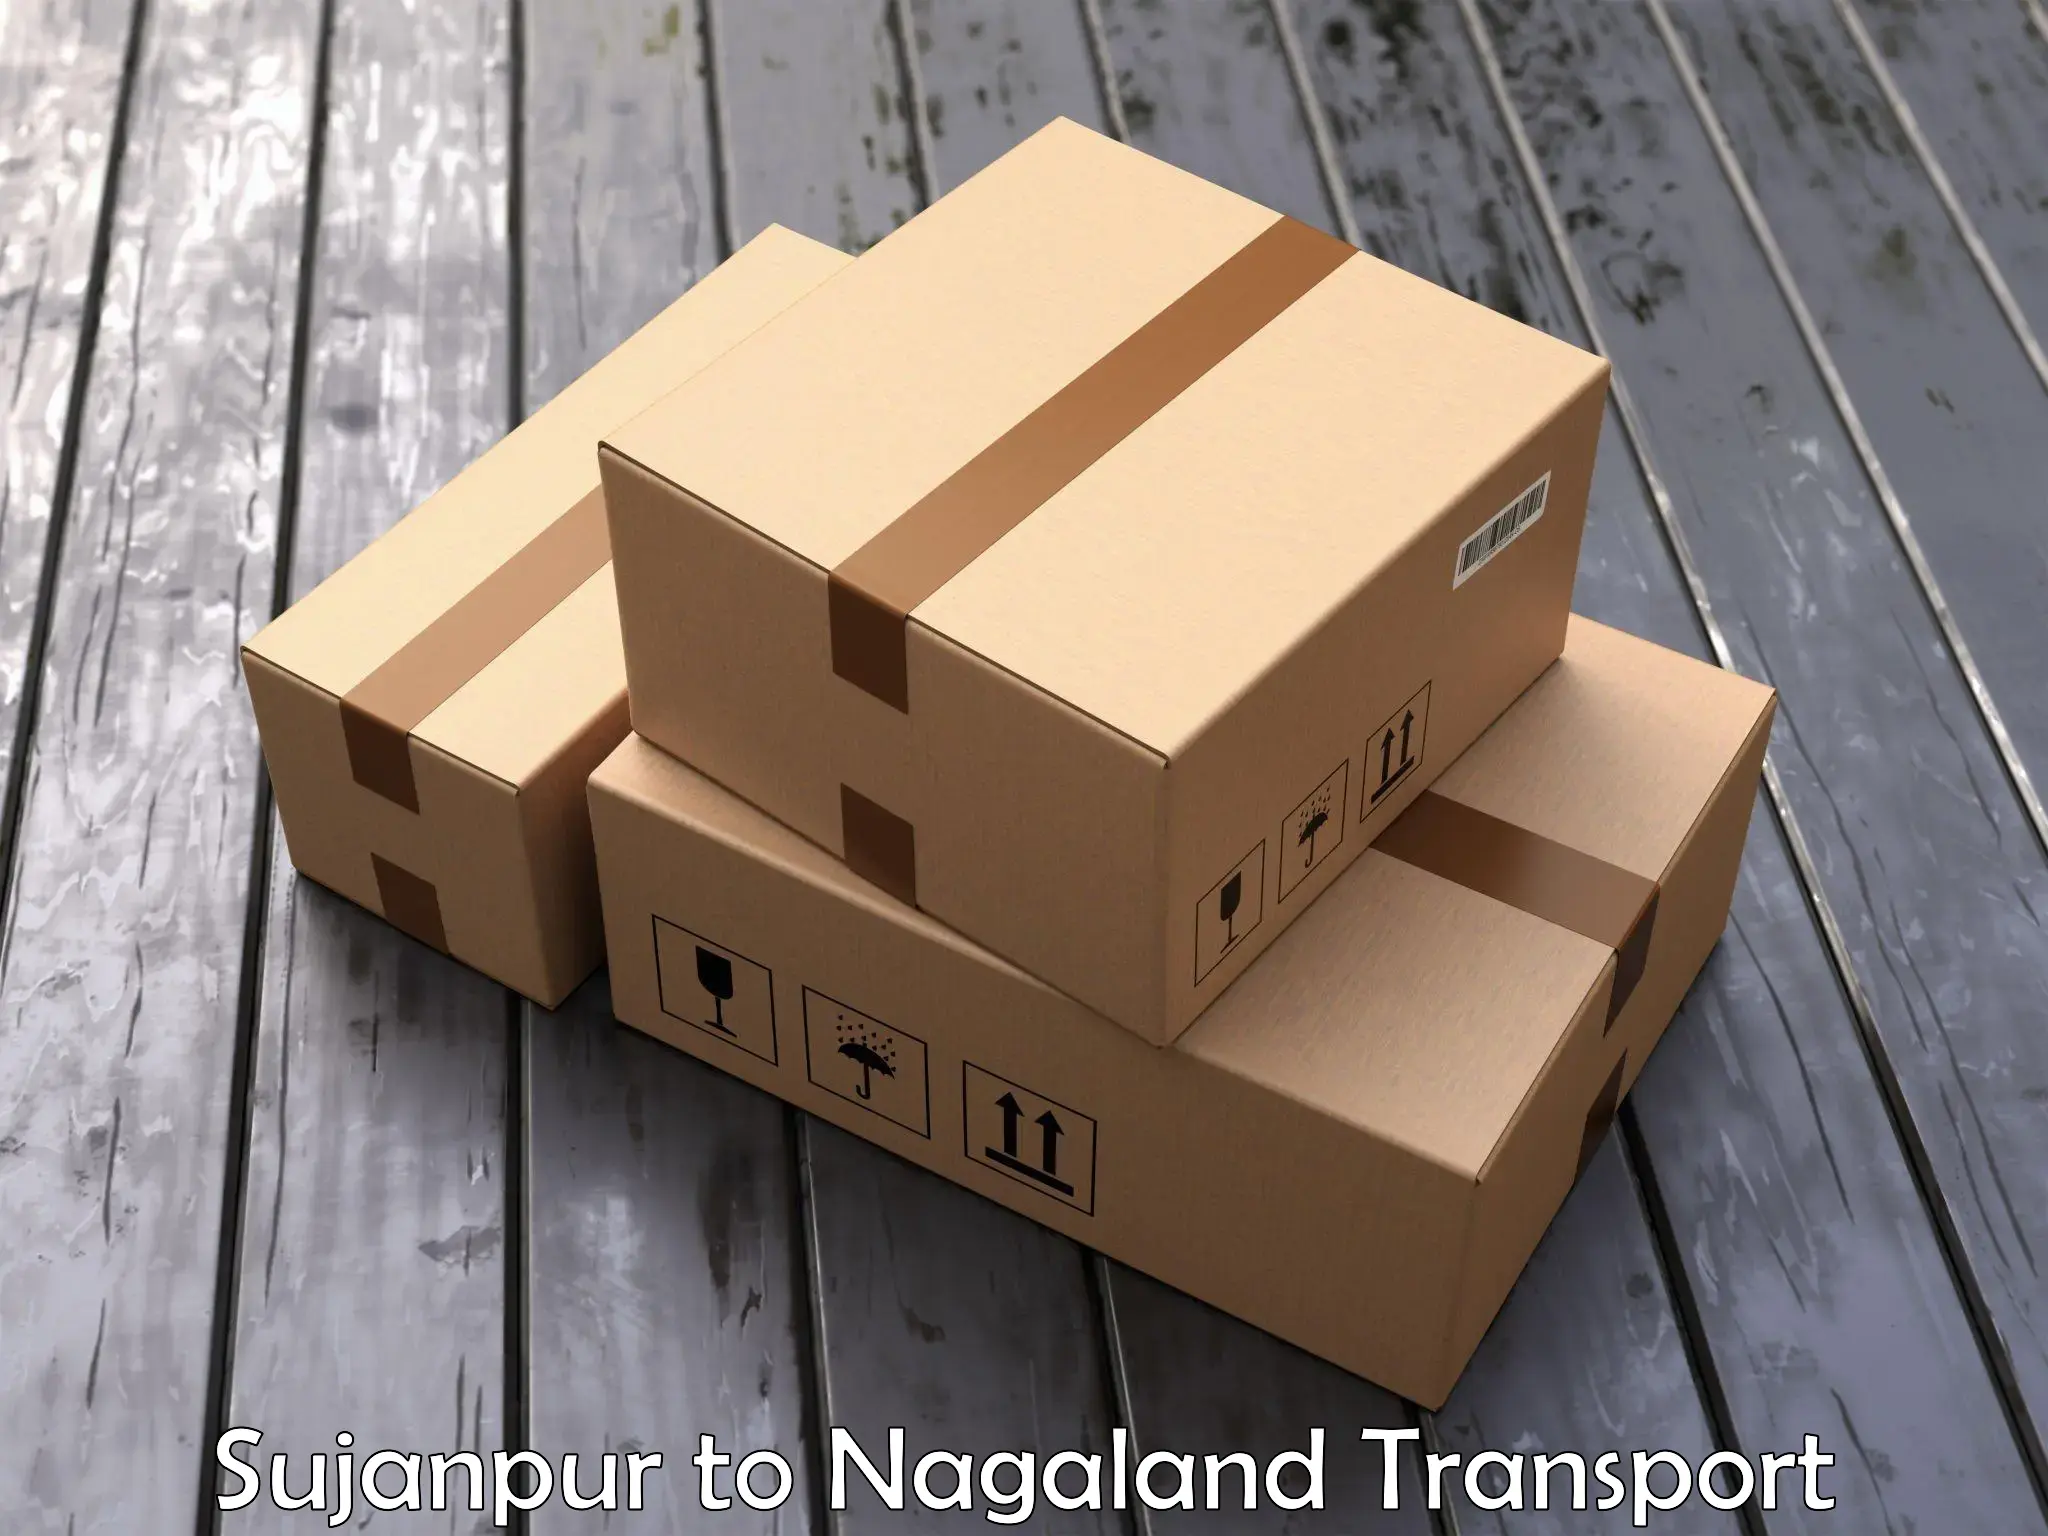 Two wheeler parcel service in Sujanpur to Dimapur